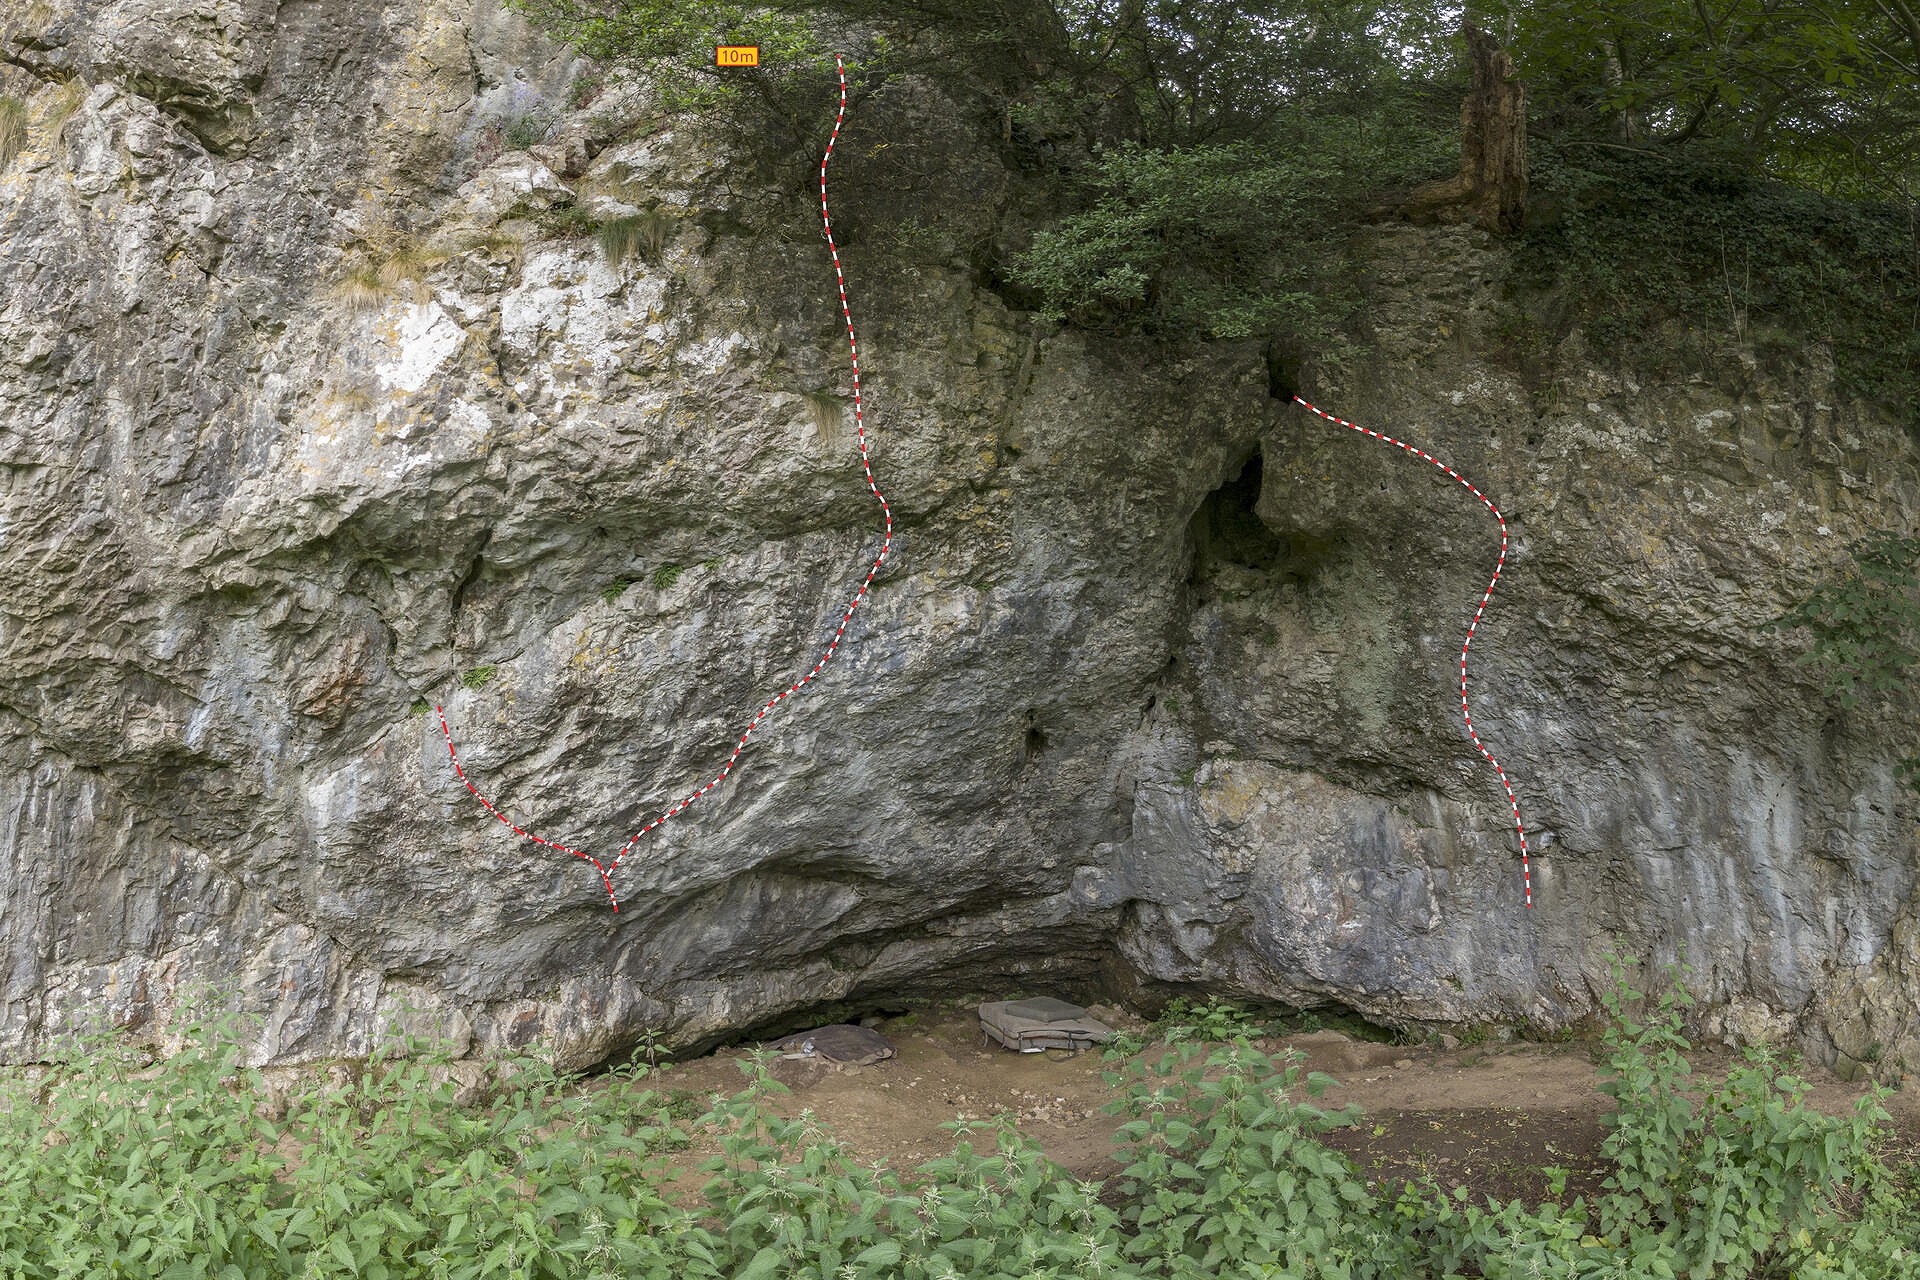 From left to right: Dandelion Mind (8B), Bewilderness (8B+) and Badger Badger Badger (8A)  © Rockfax